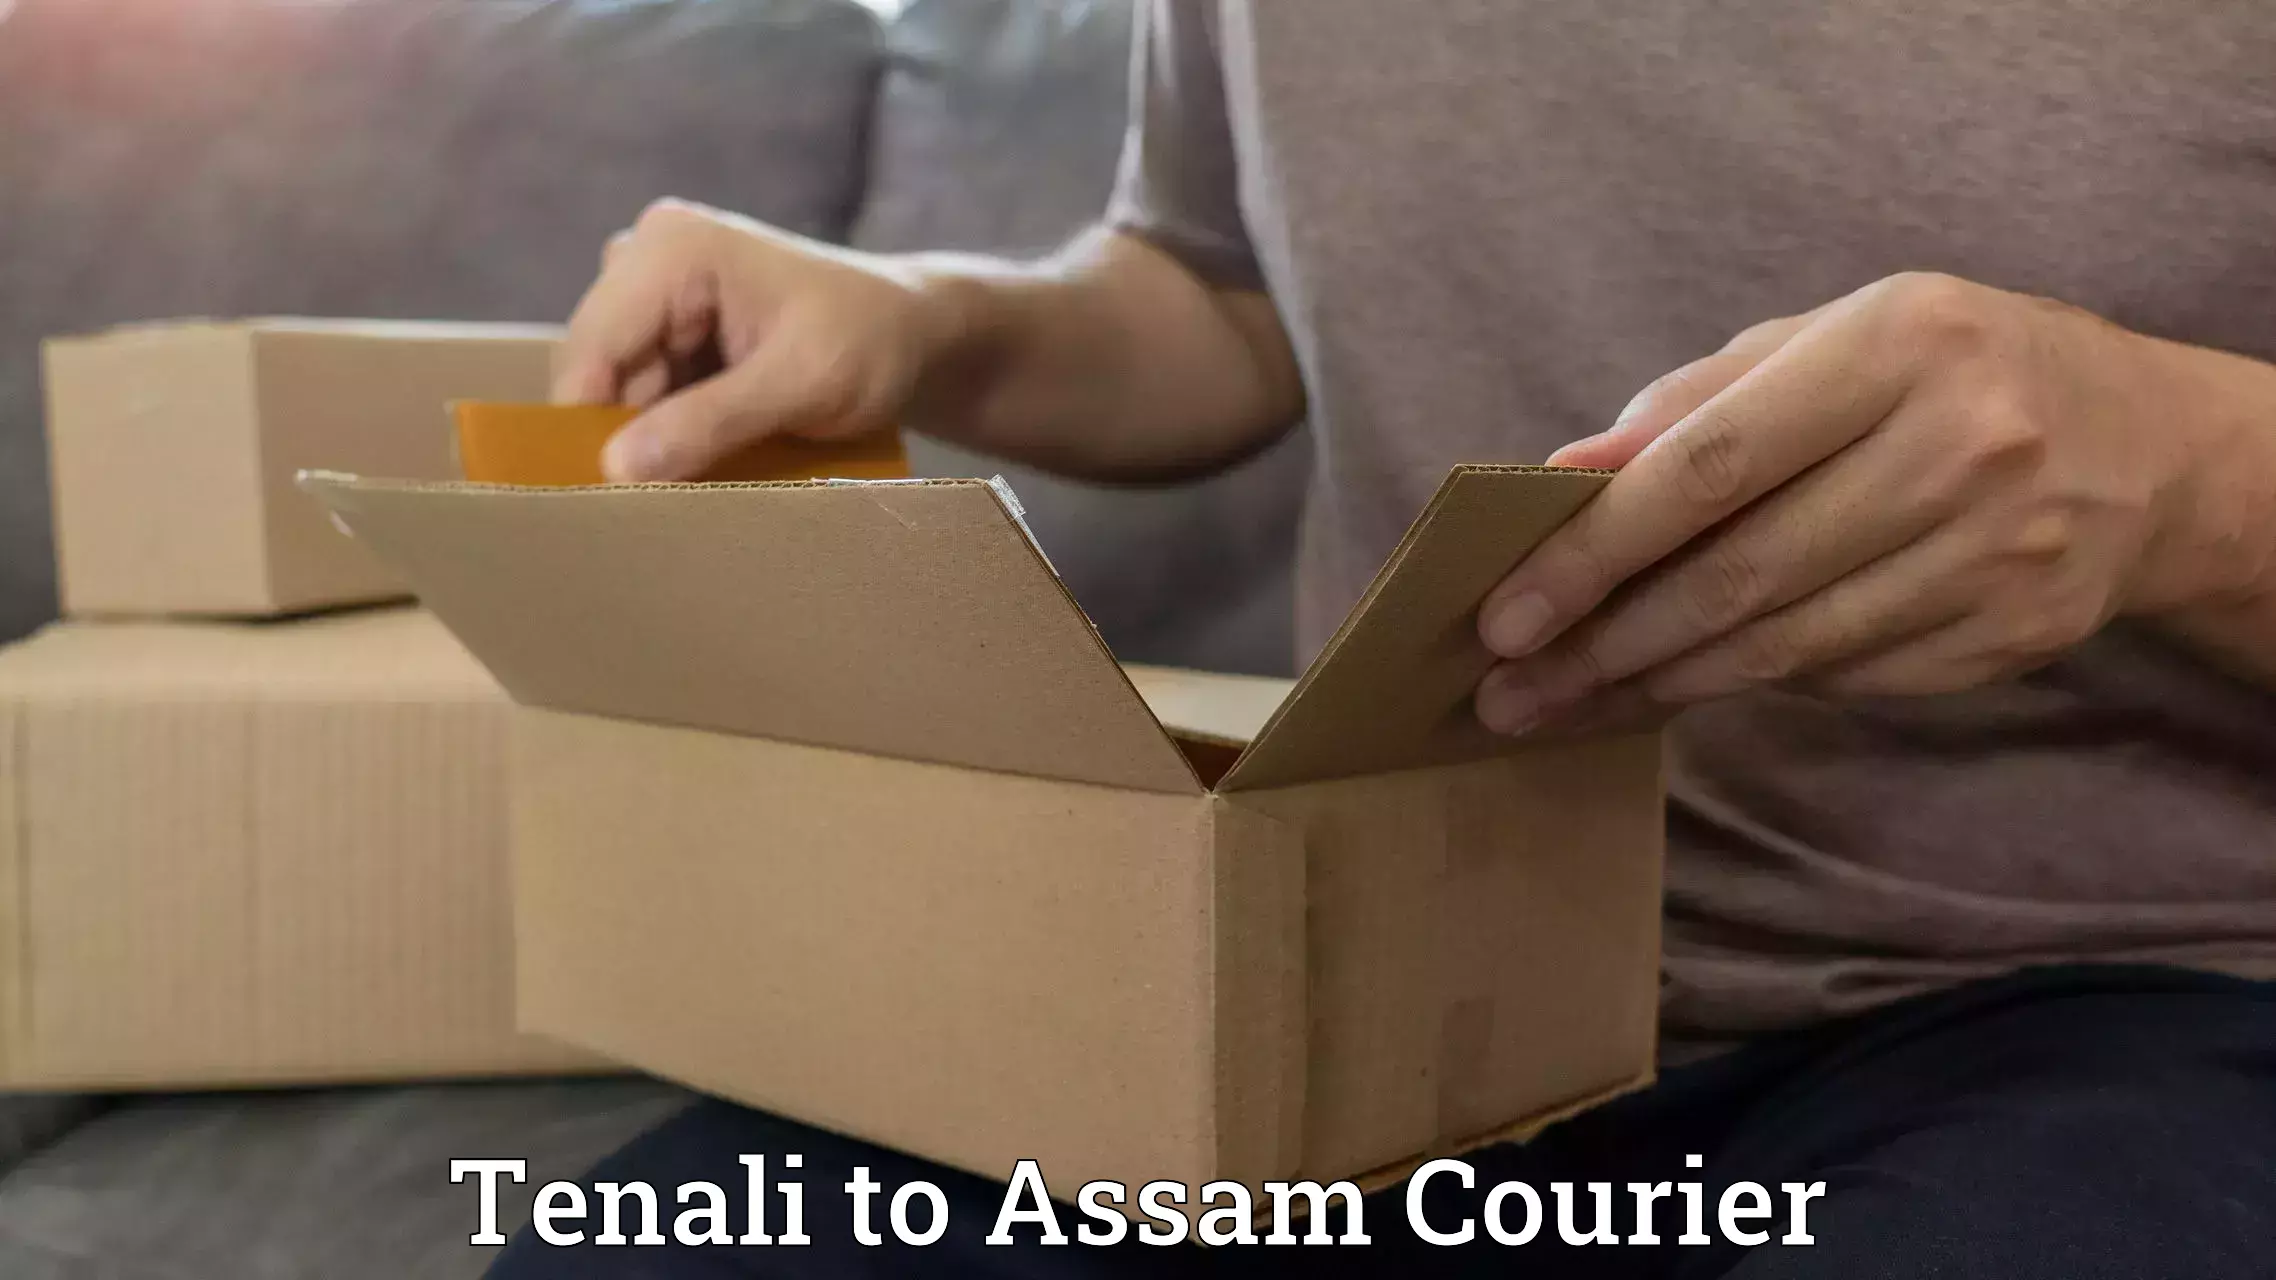 Cost-effective shipping solutions Tenali to Lala Assam